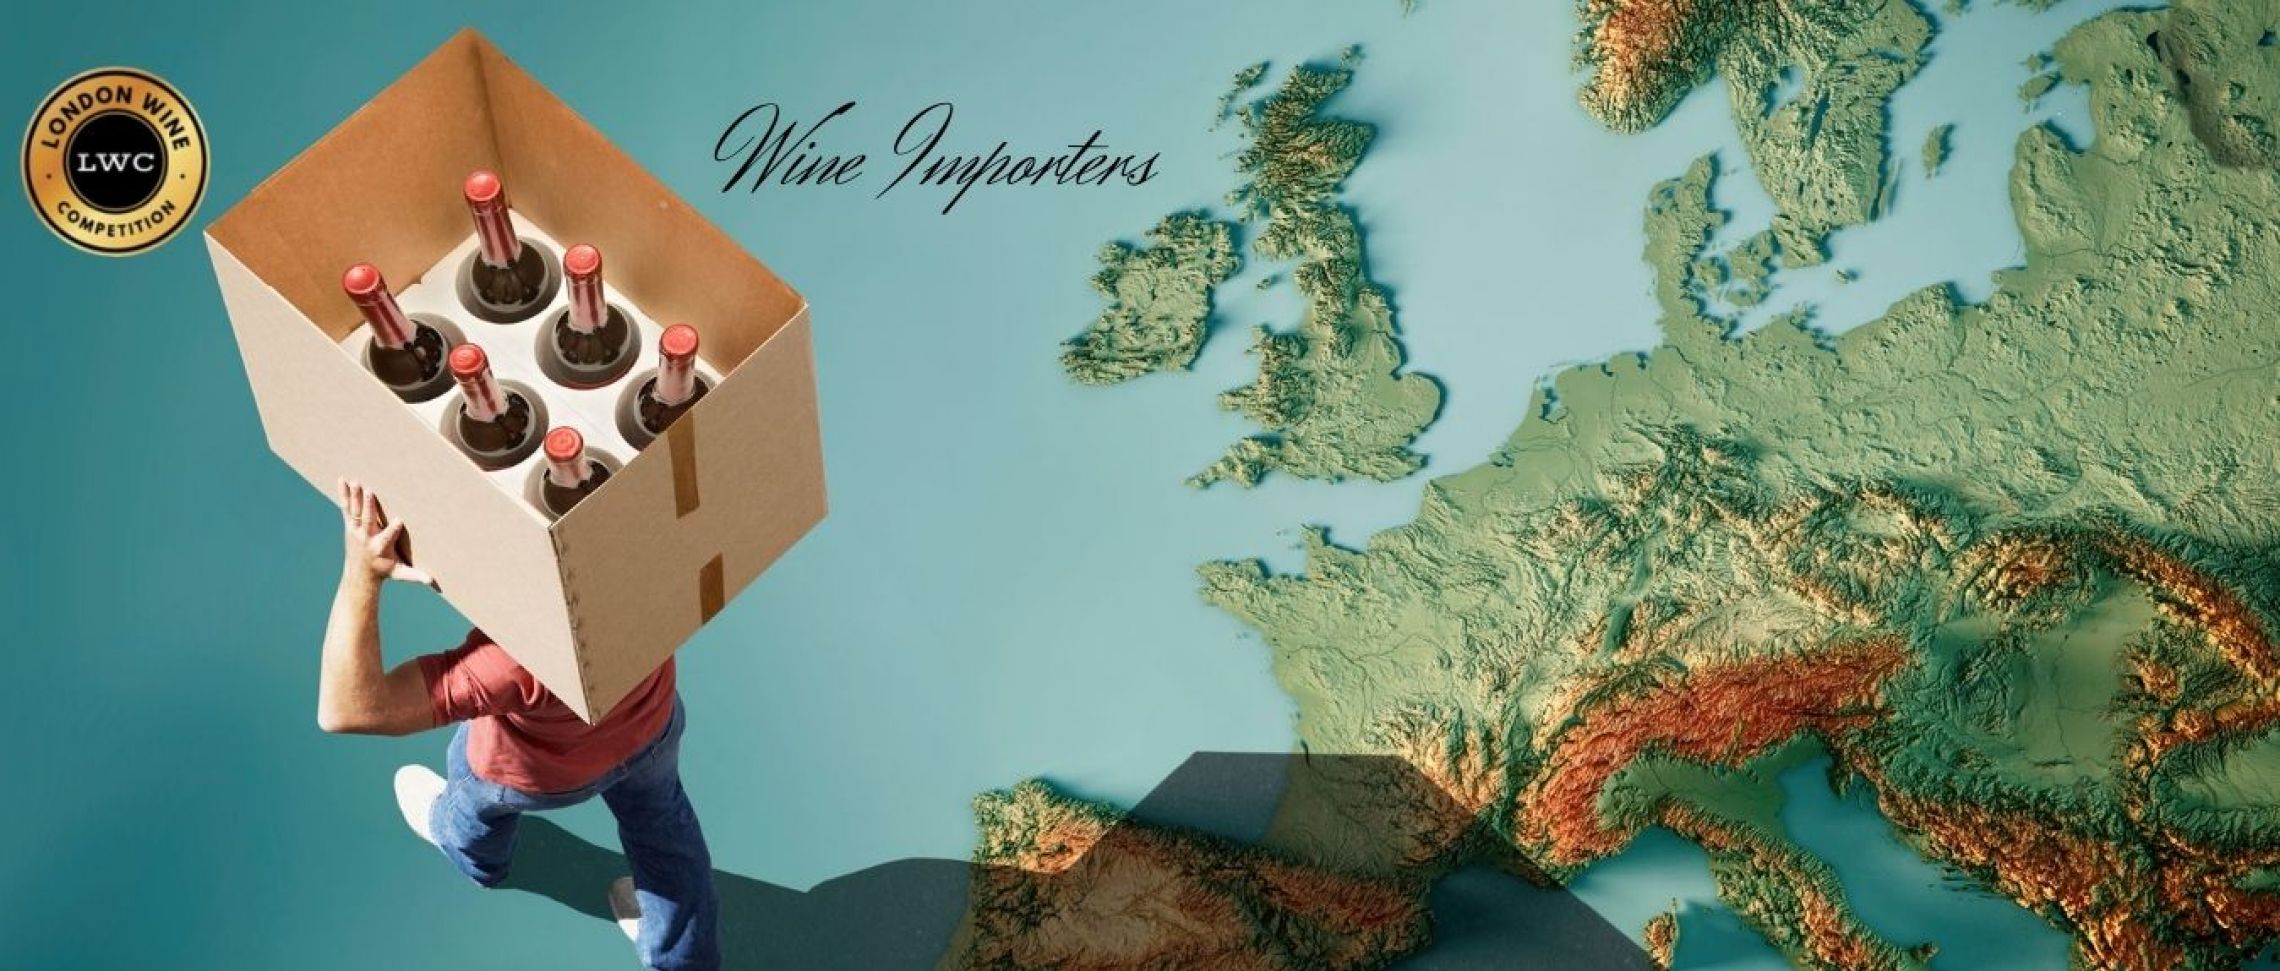 Photo for: What are UK wine importers really looking for in a new brand?